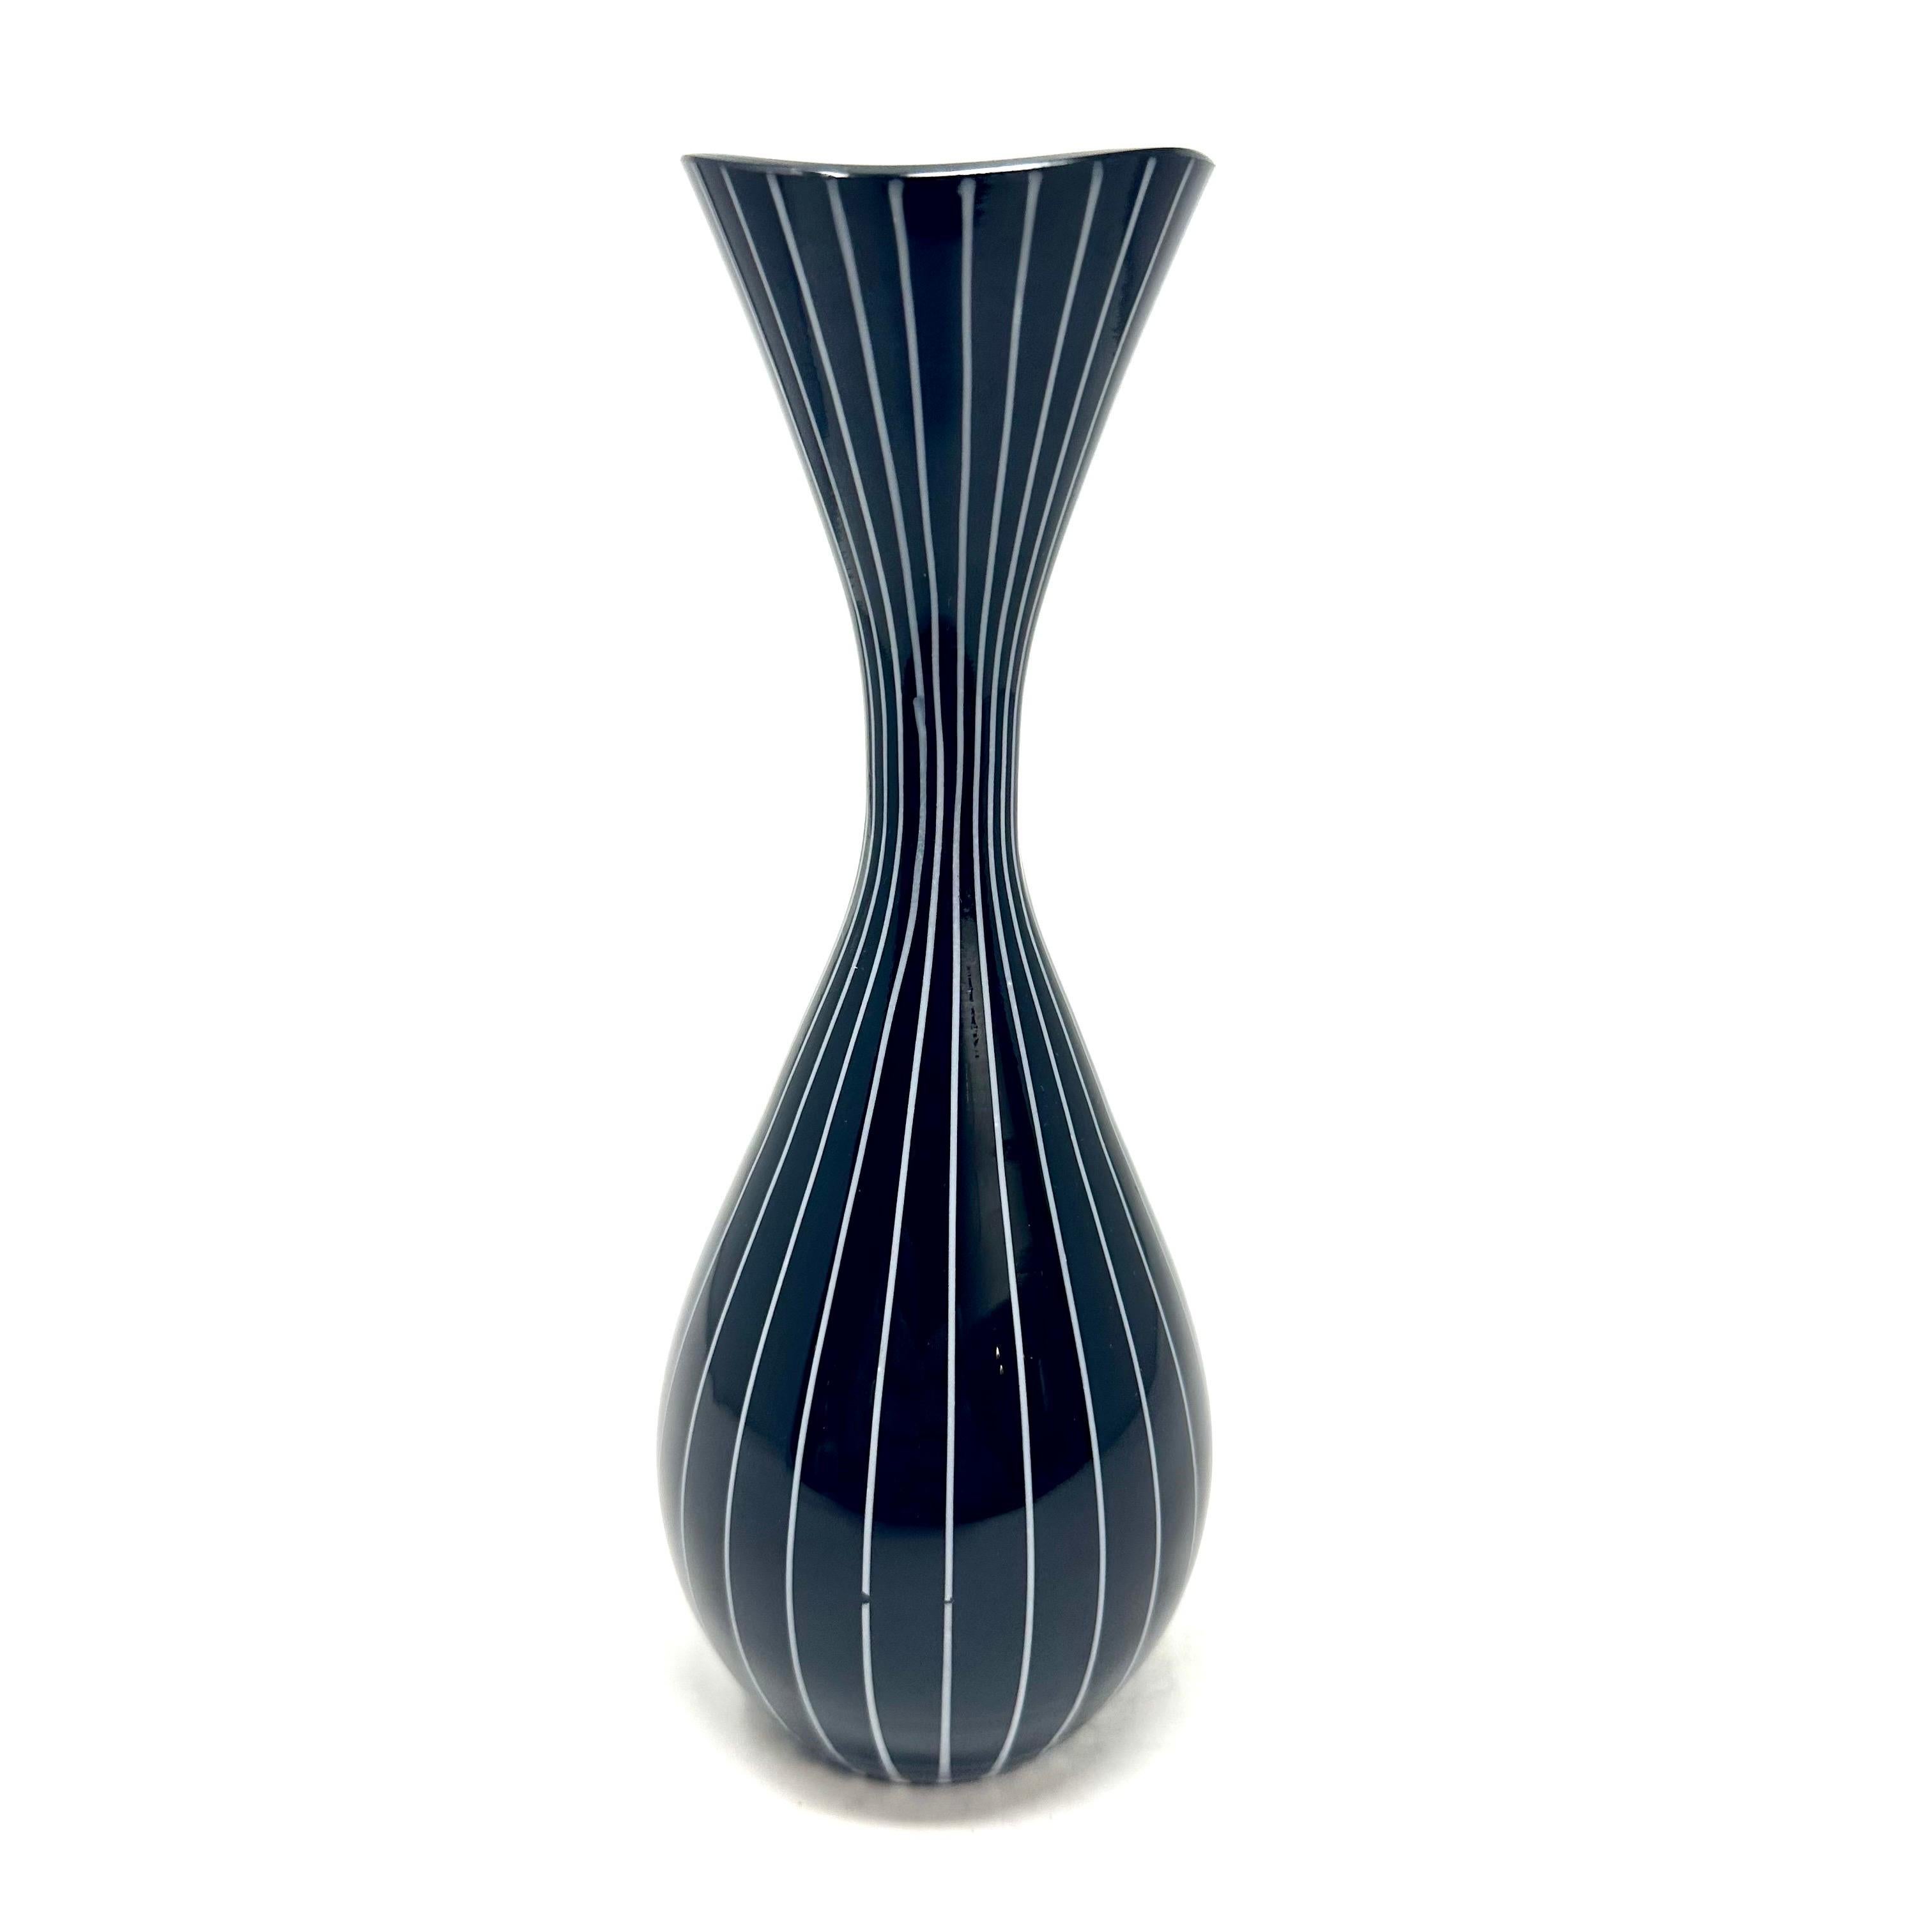 1950s black striped cased glass vase designed by Gunnar Ander for Lindshammer. Made in Sweden, the vase has a black and white striped exterior and white interior. In excellent condition.

Diameter: 2.75 in / Height: 7.125 in